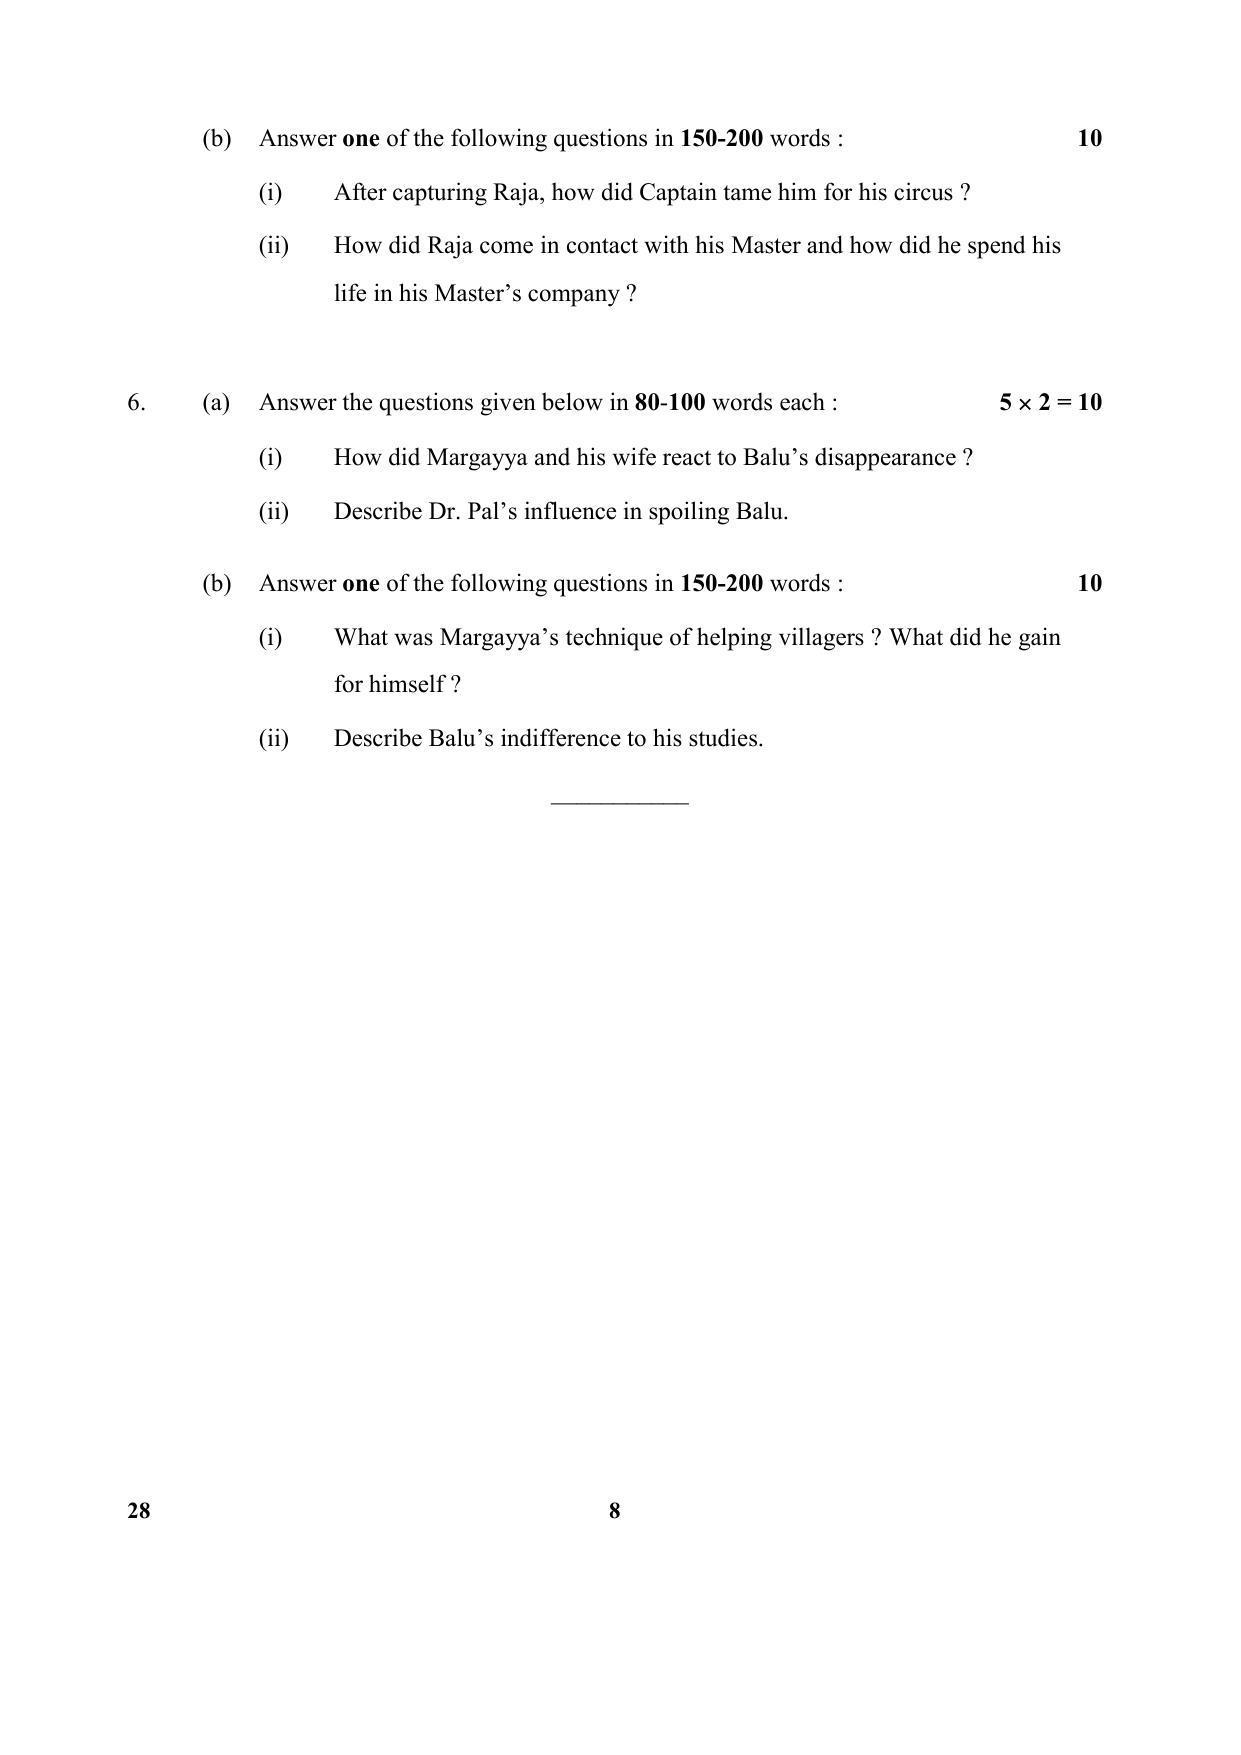 CBSE Class 12 28 (English) Elec 2017-comptt Question Paper - Page 8